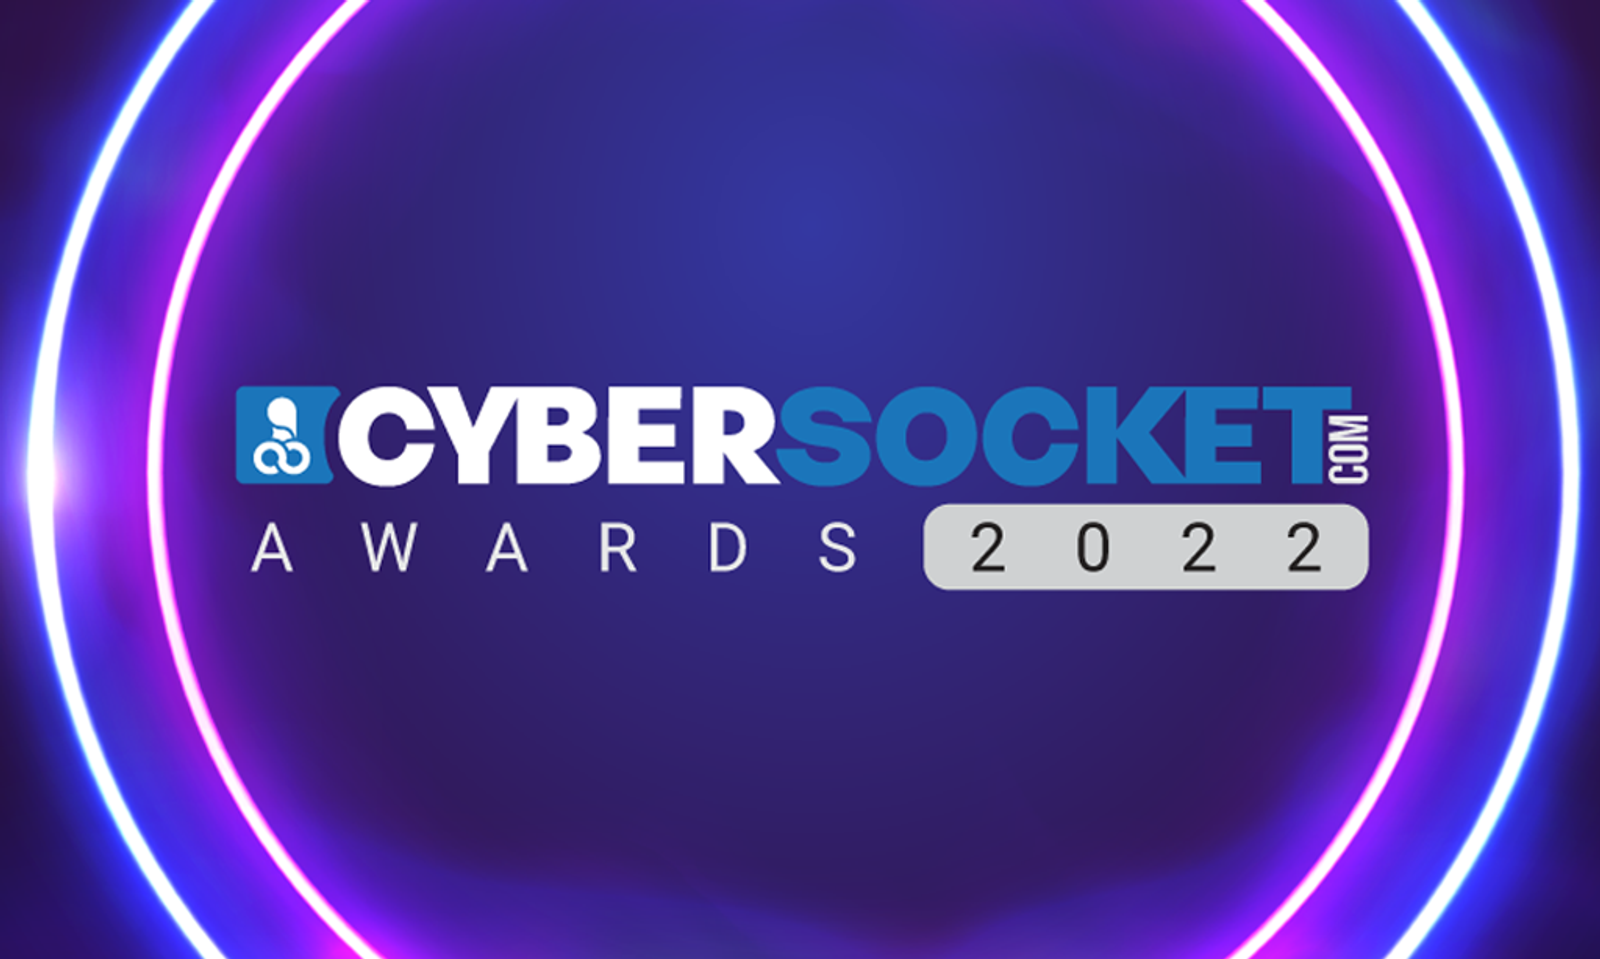 Nominations Announced, Voting Open for 2022 Cybersocket Awards